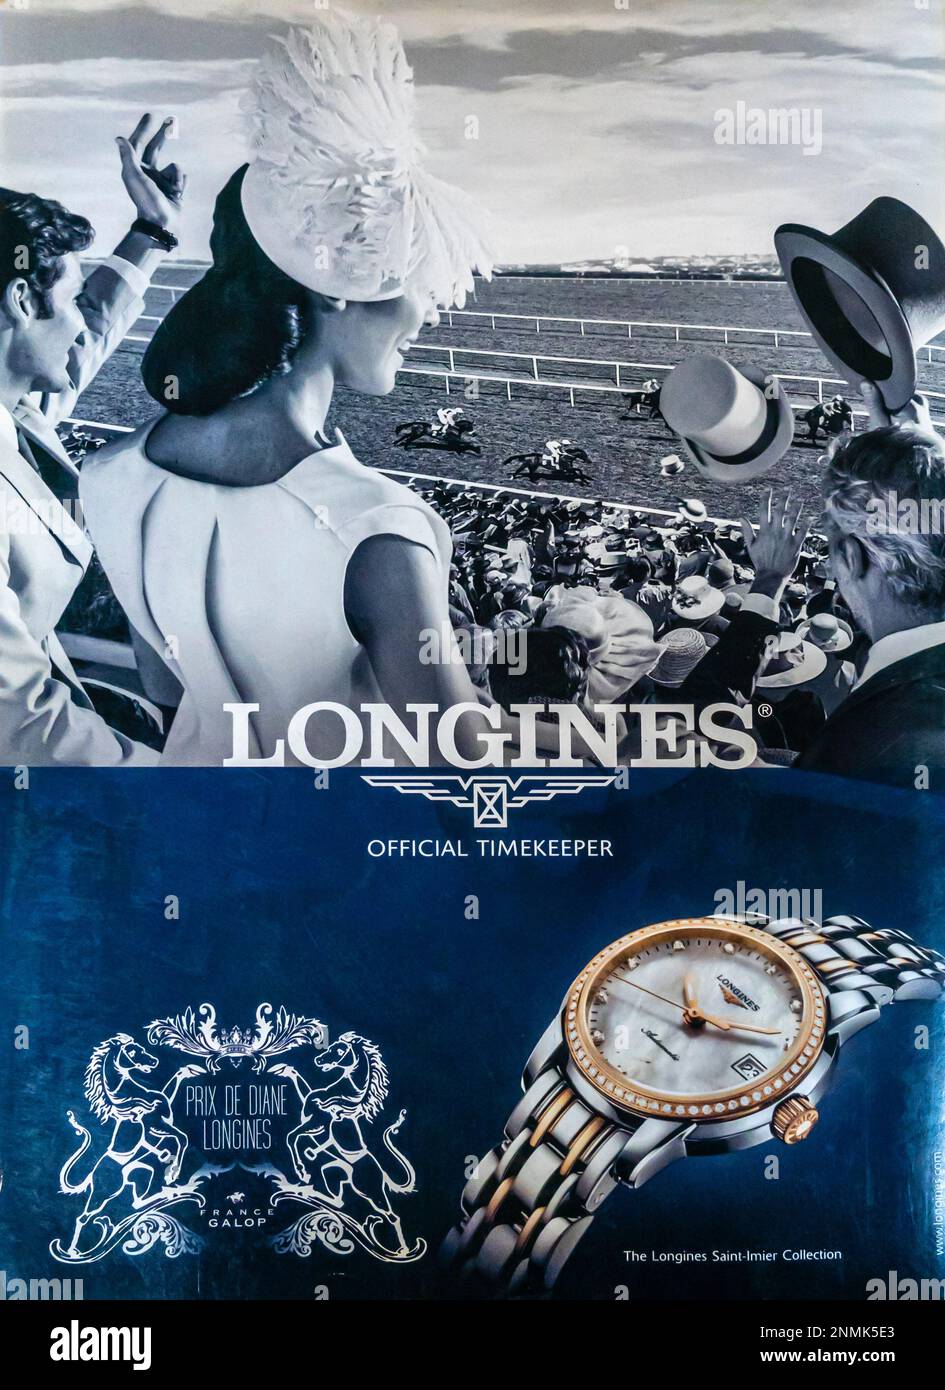 Longines Saint-Imier collection watch advert in a Natgeo magazine, June 2012 Stock Photo